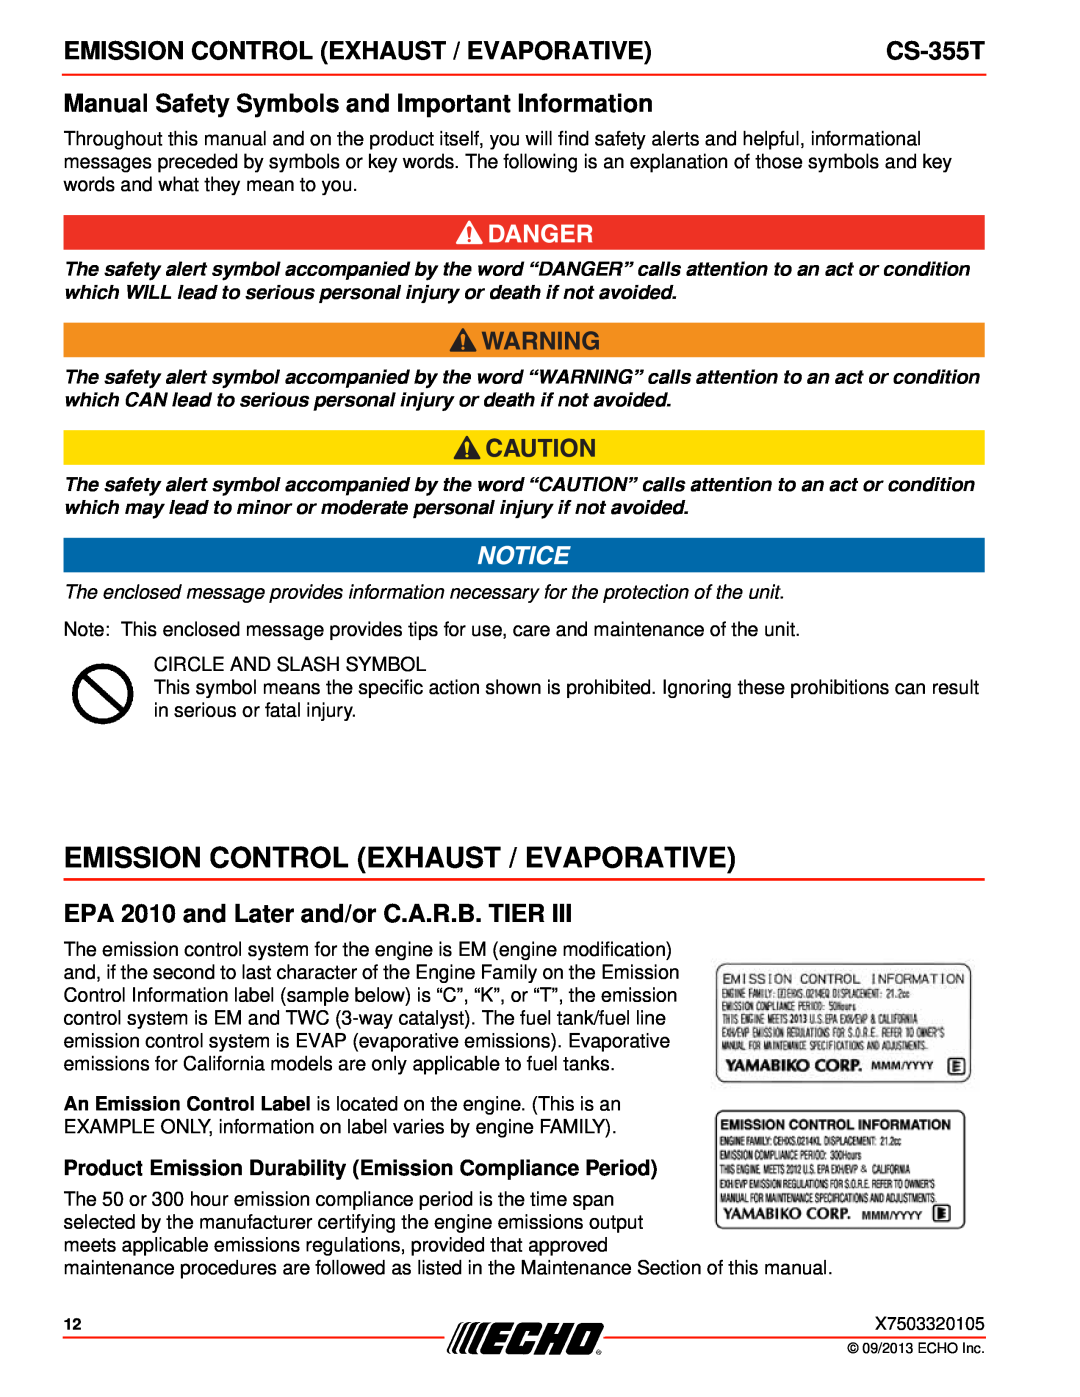 Echo CS-355T instruction manual Emission Control Exhaust / Evaporative, Manual Safety Symbols and Important Information 